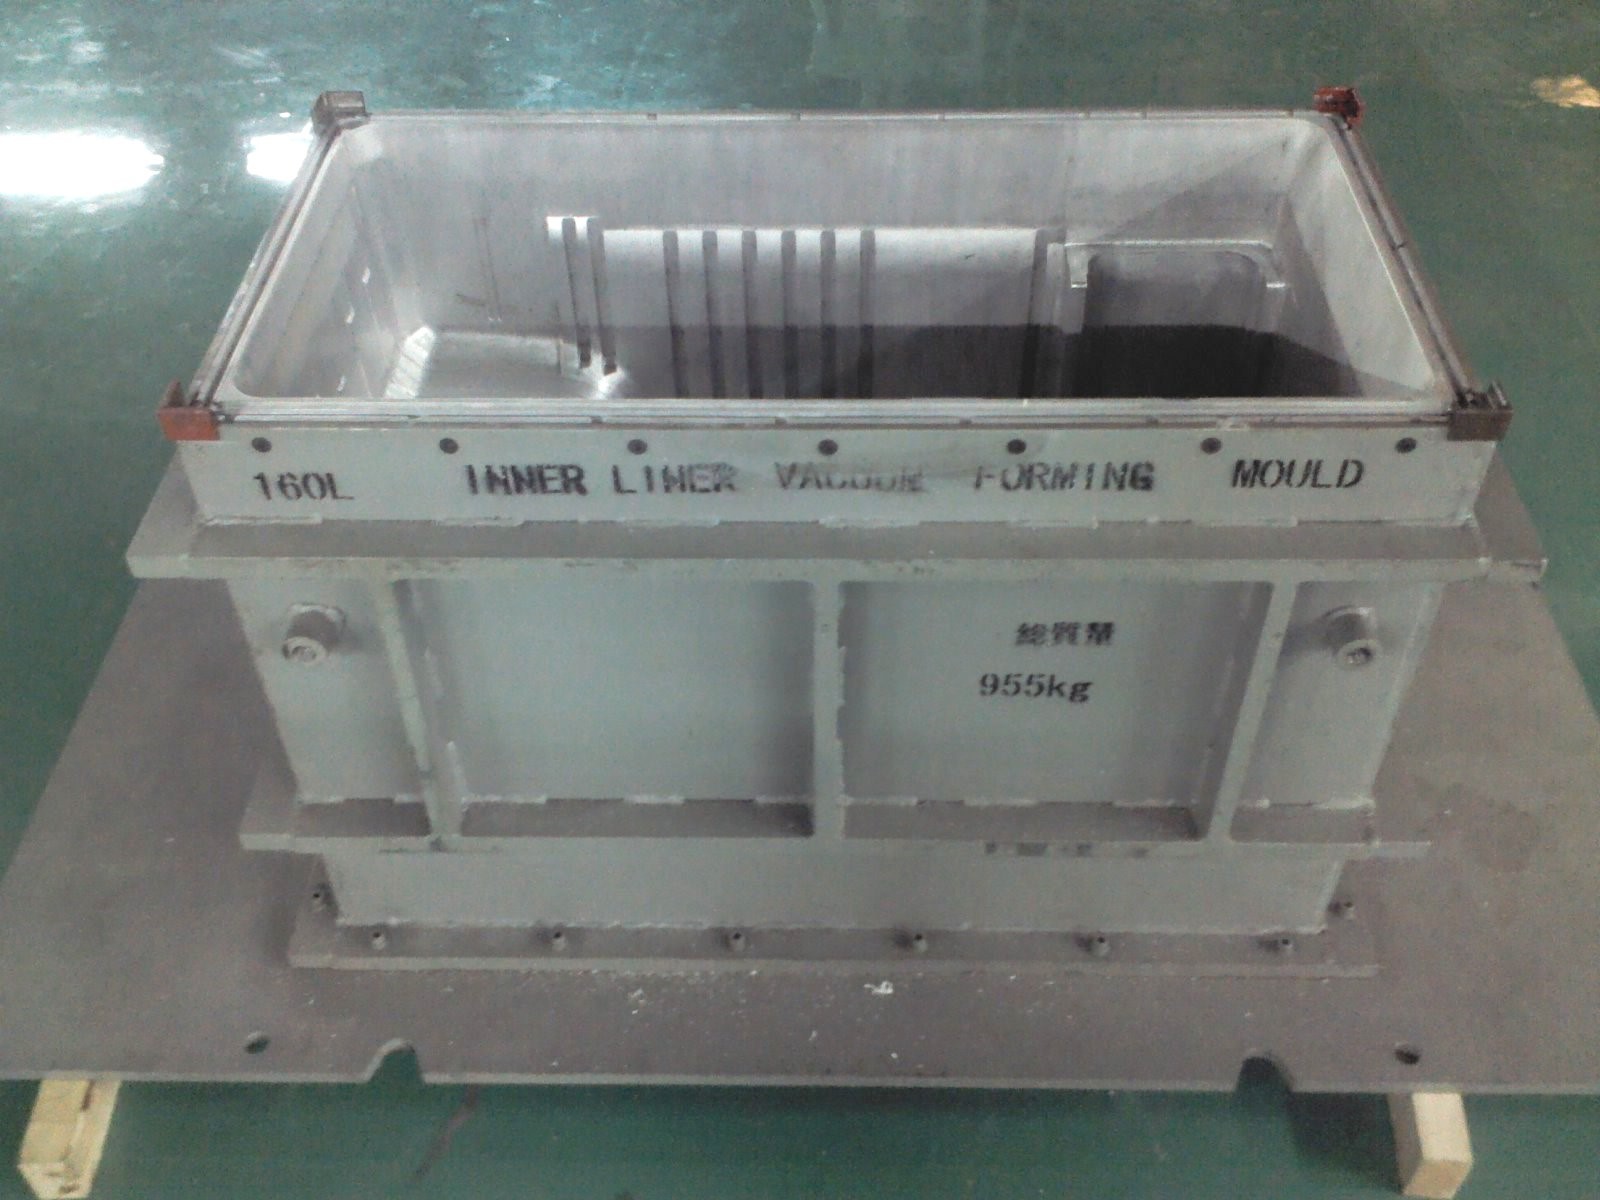 Figure 1: Vacuum forming mold made with a steel frame and aluminum cavity, designed to produce the inner liner of a refrigerator. Source: Blue tooth7/CC BY-SA 4.0